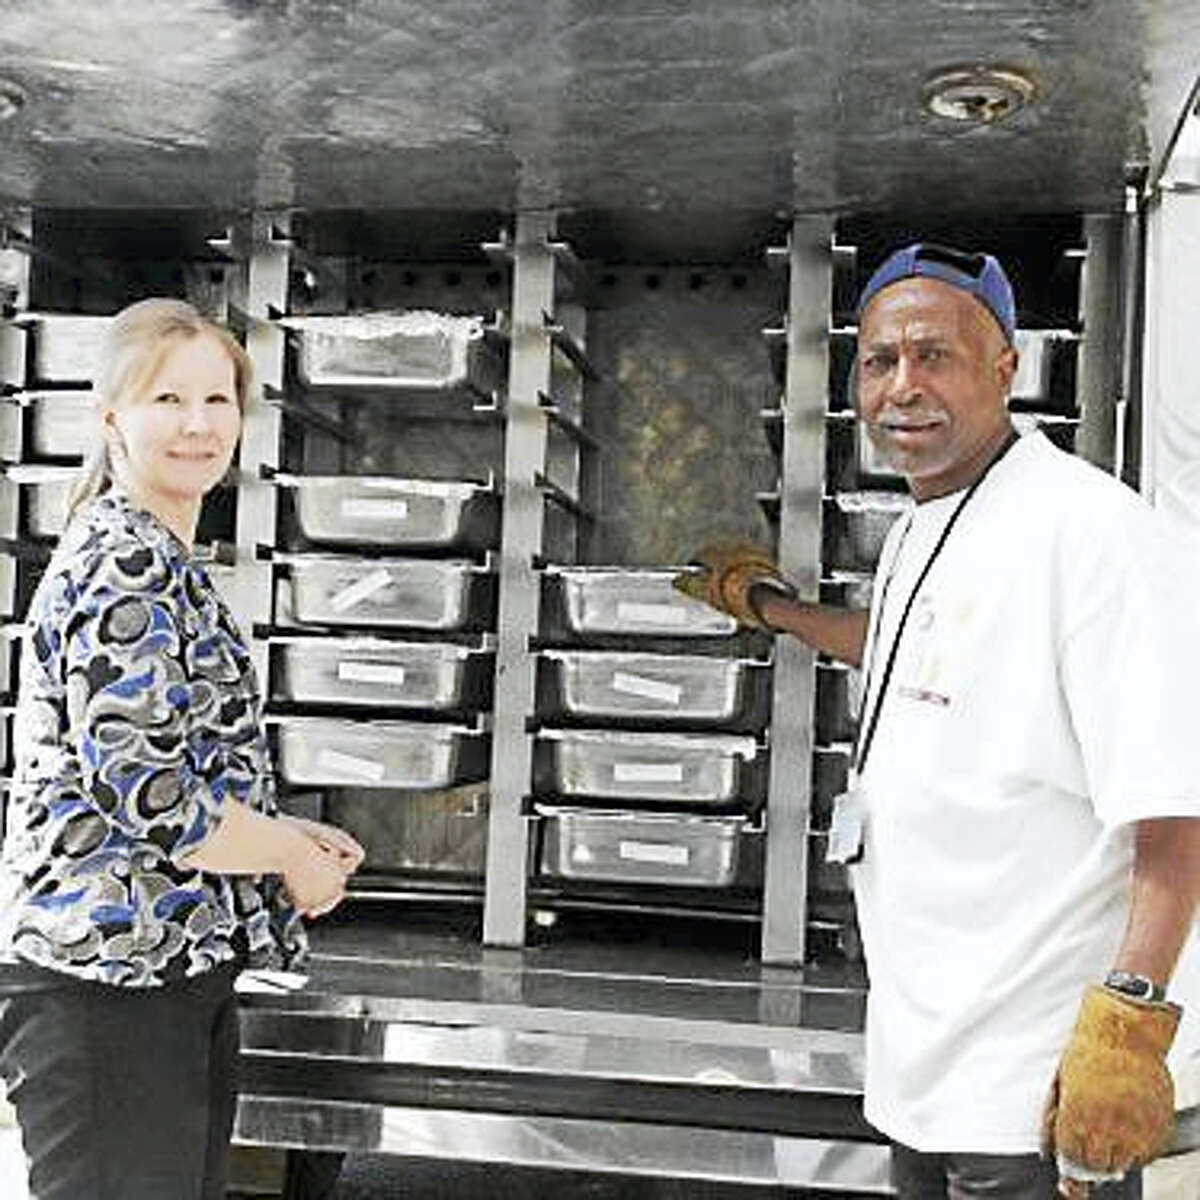 Volunteers, essential to the Meals on Wheels program offered locally in Middletown and Portland, bring nutritious meals to the elderly at home.